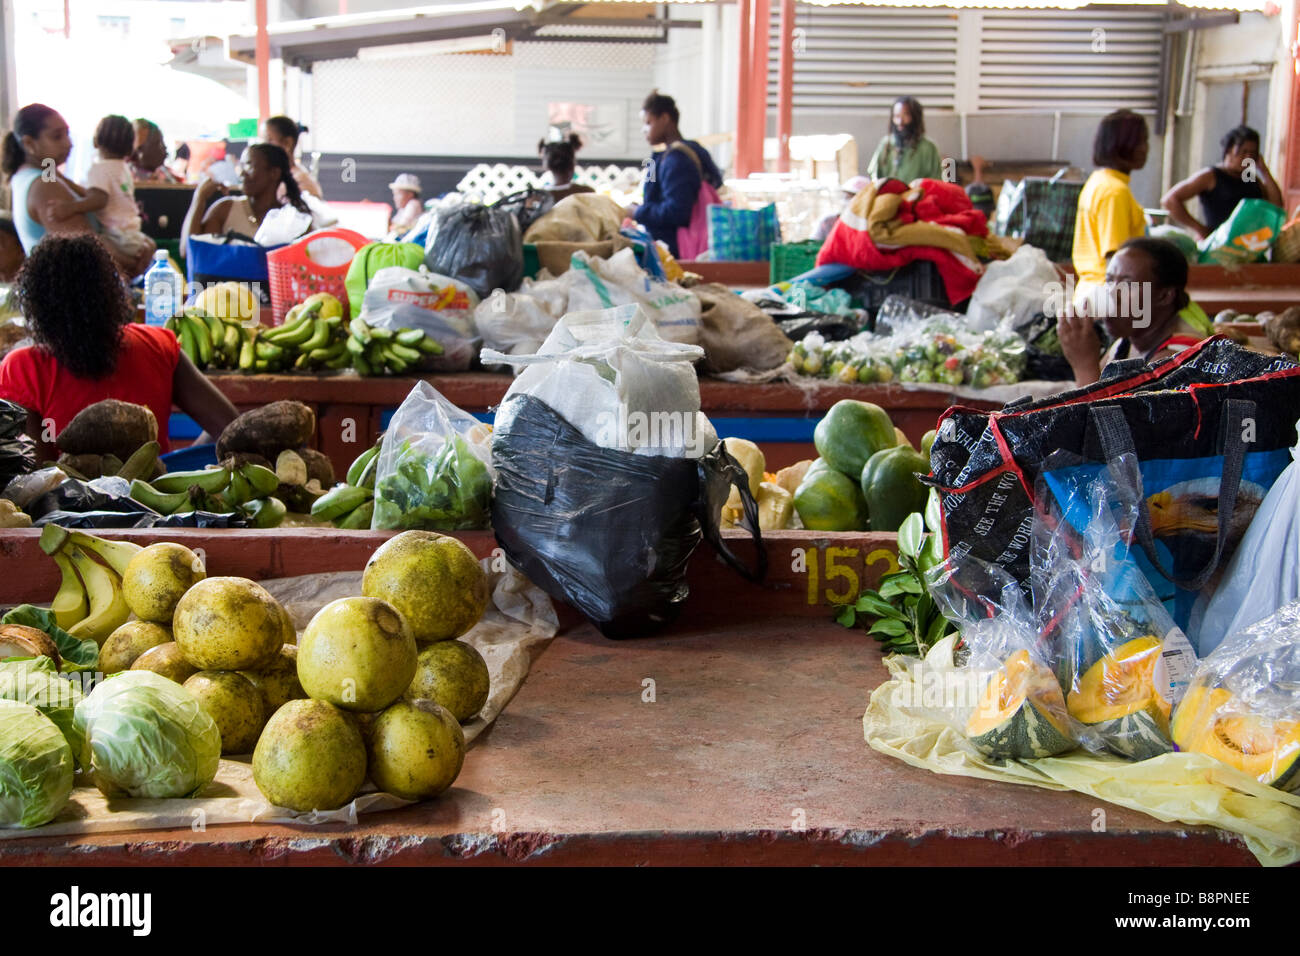 Castries local market, Castries, St. Lucia Stock Photo